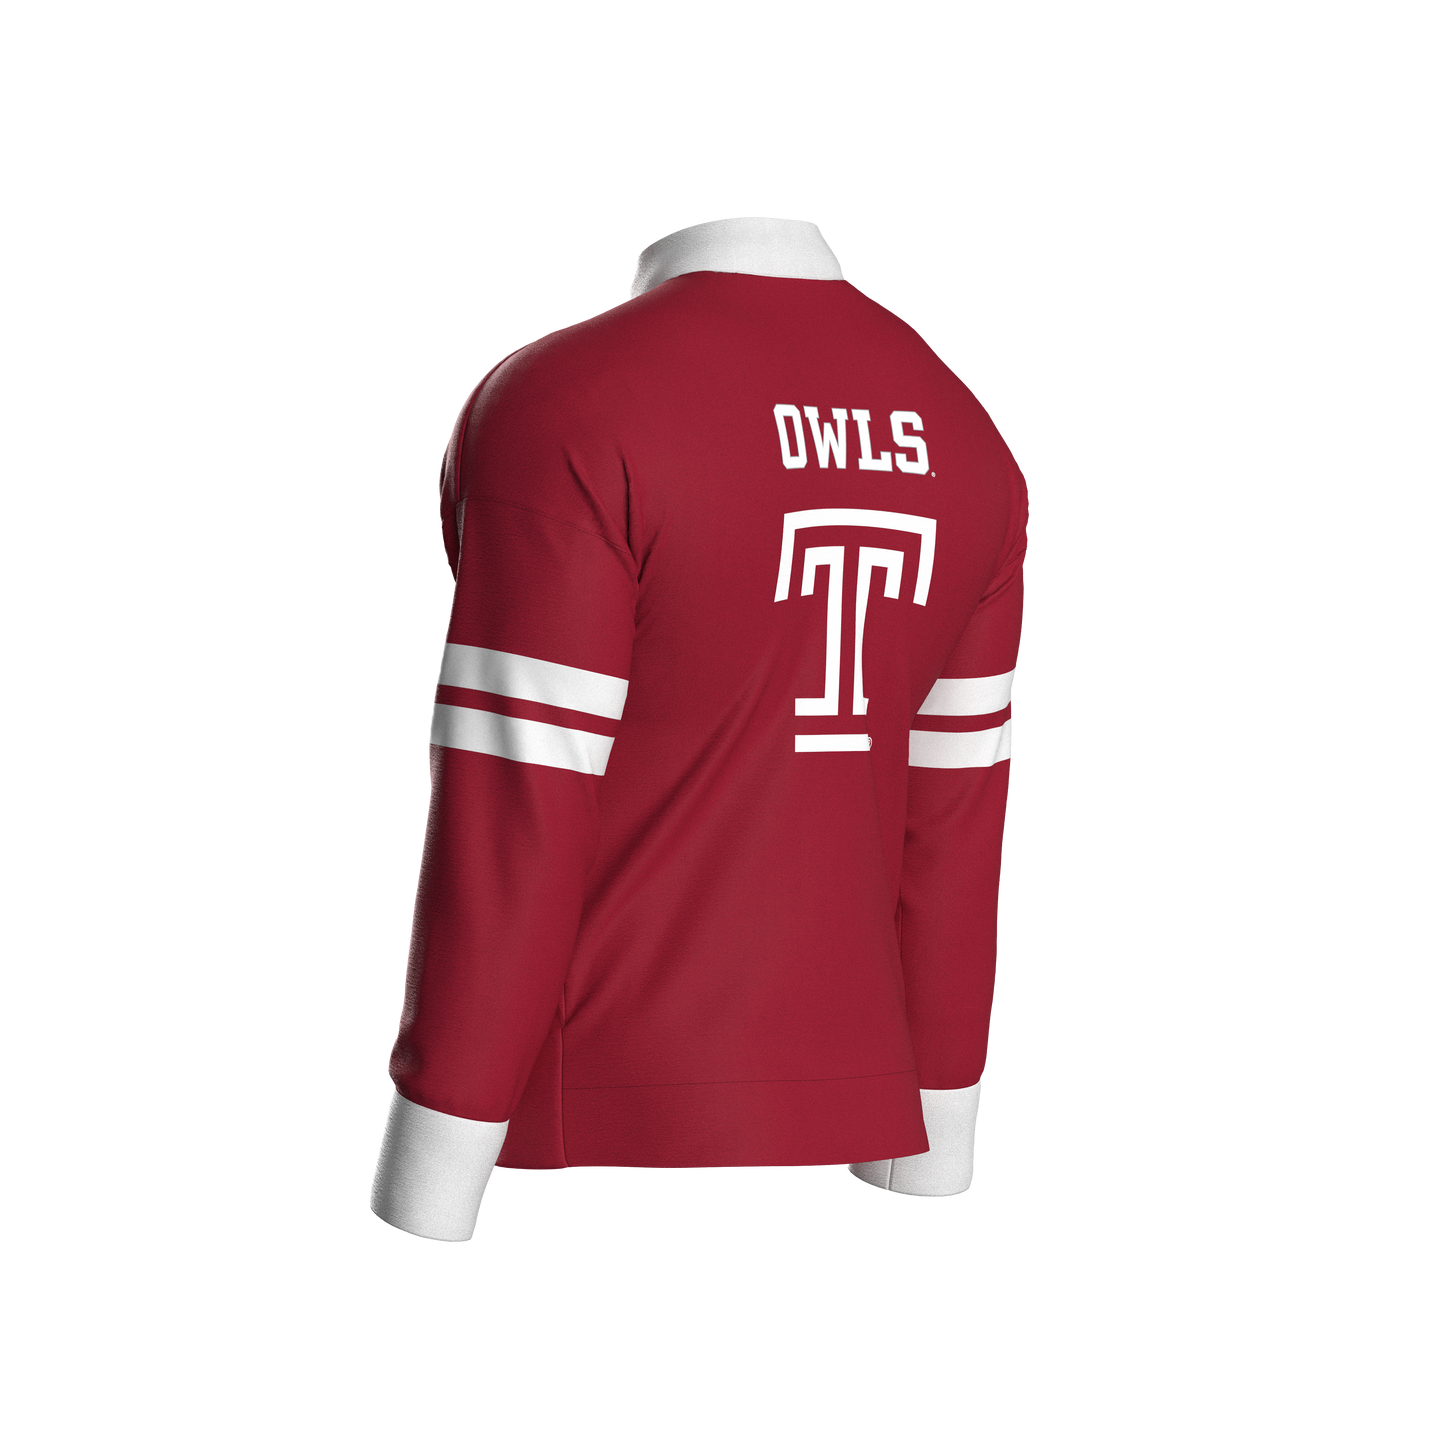 Temple University Home Zip-Up (youth)